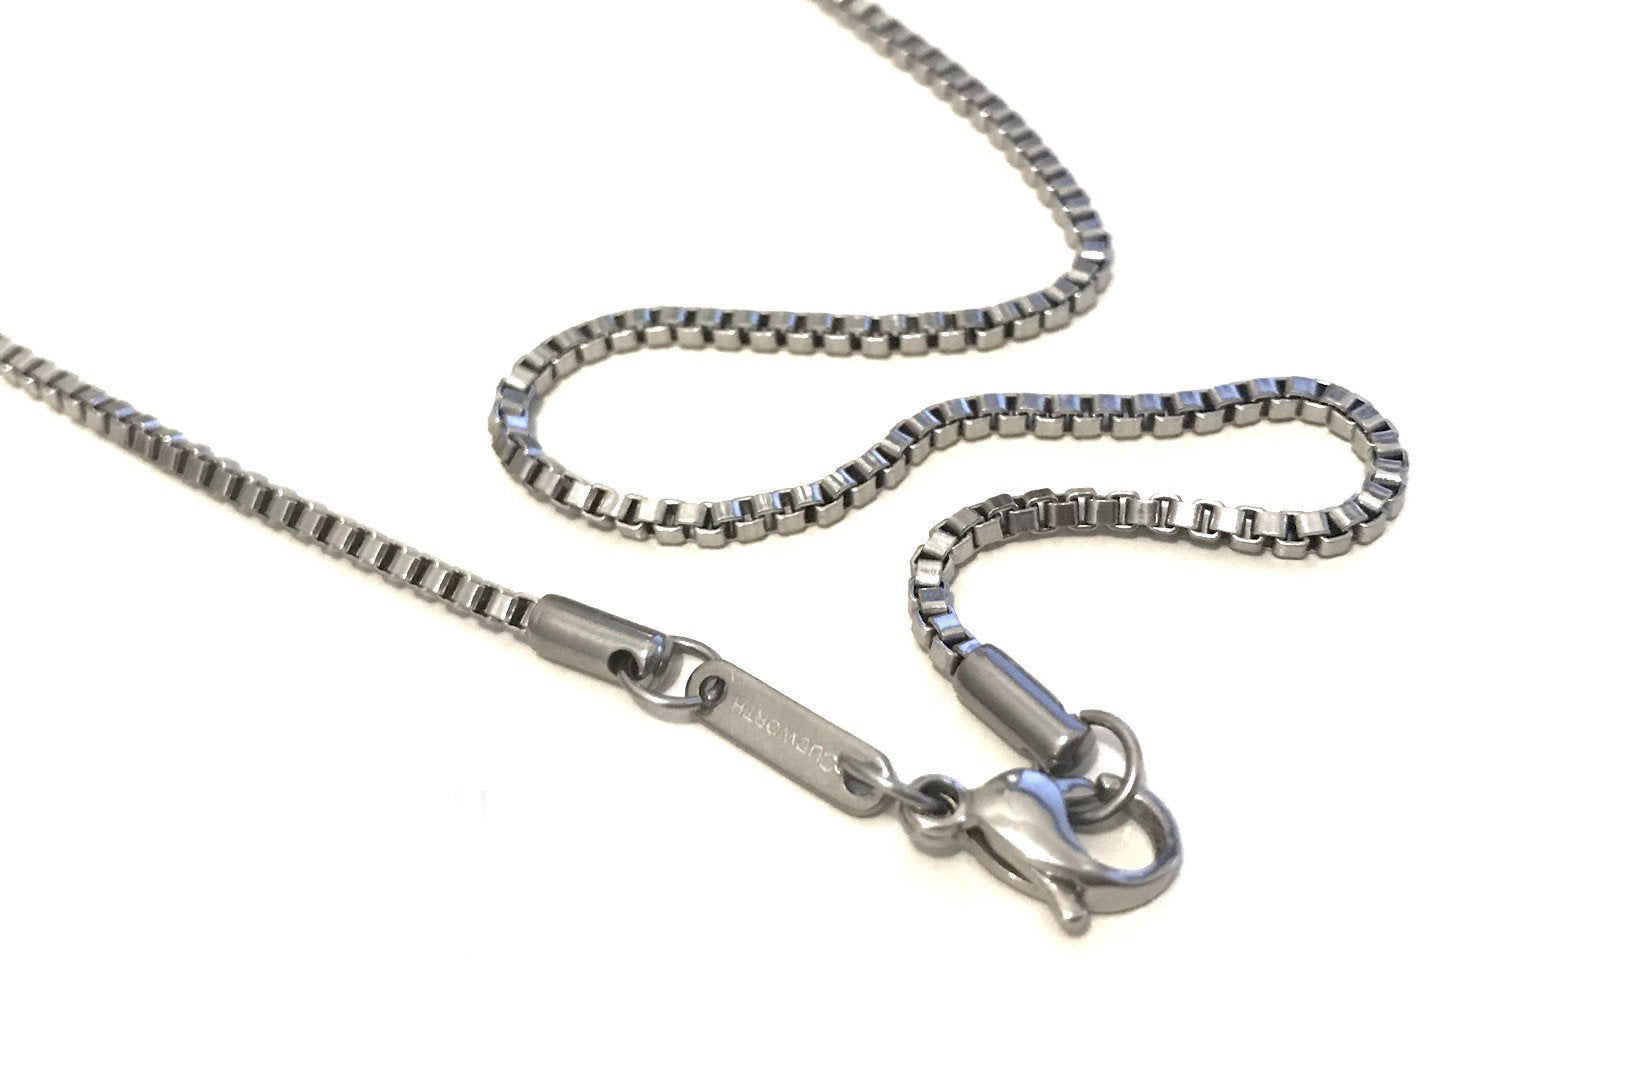 BEON.COM.AU Mens Box Chain Necklace by Cudworth featuring: - All Stainless Steel construction so it won't tarnish or rust - Attach your own pendants or just wear it on it's own. See pictured with our Flat Mens Steel Ring being used as a pendant on this necklace (not included) - 60 cm length, boxchain... Cudworth at BEON.COM.AU